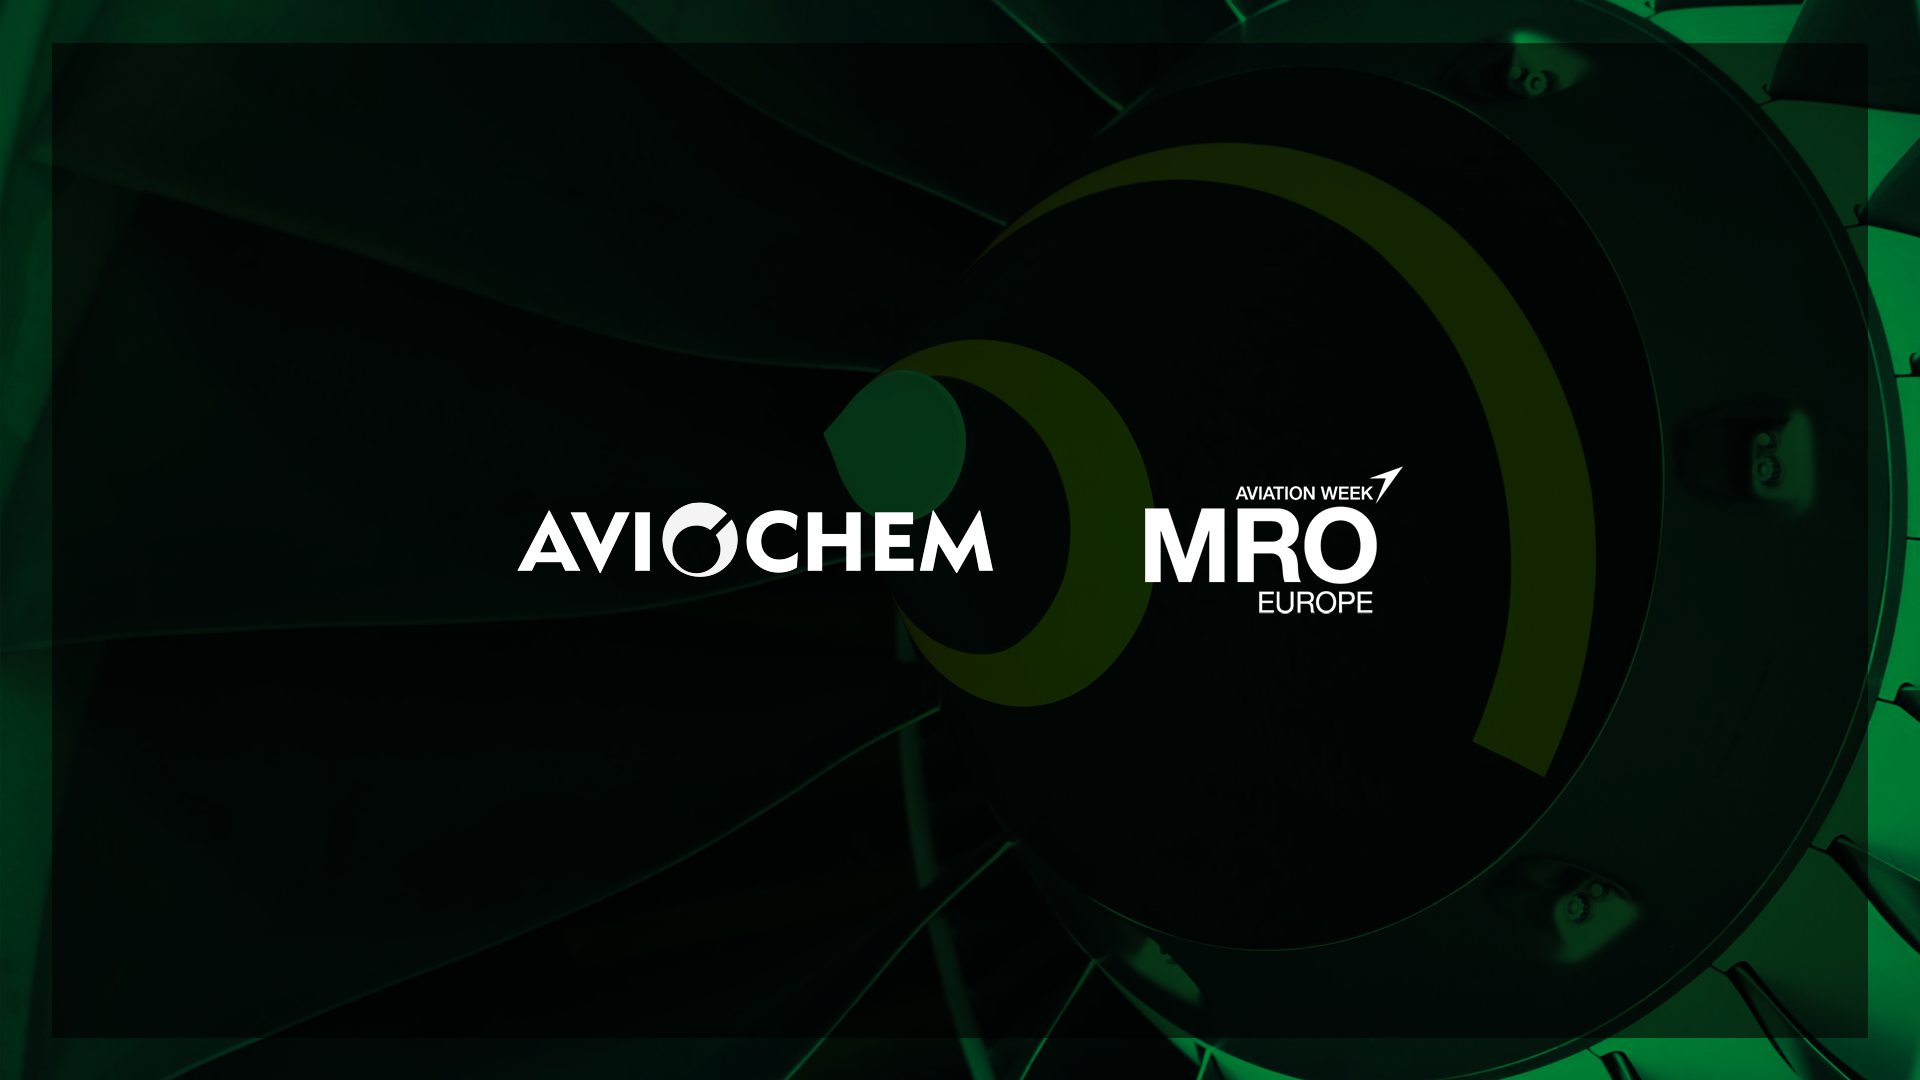 Aviochem is going to attend the MRO EUROPE in Amsterdam on October 18th